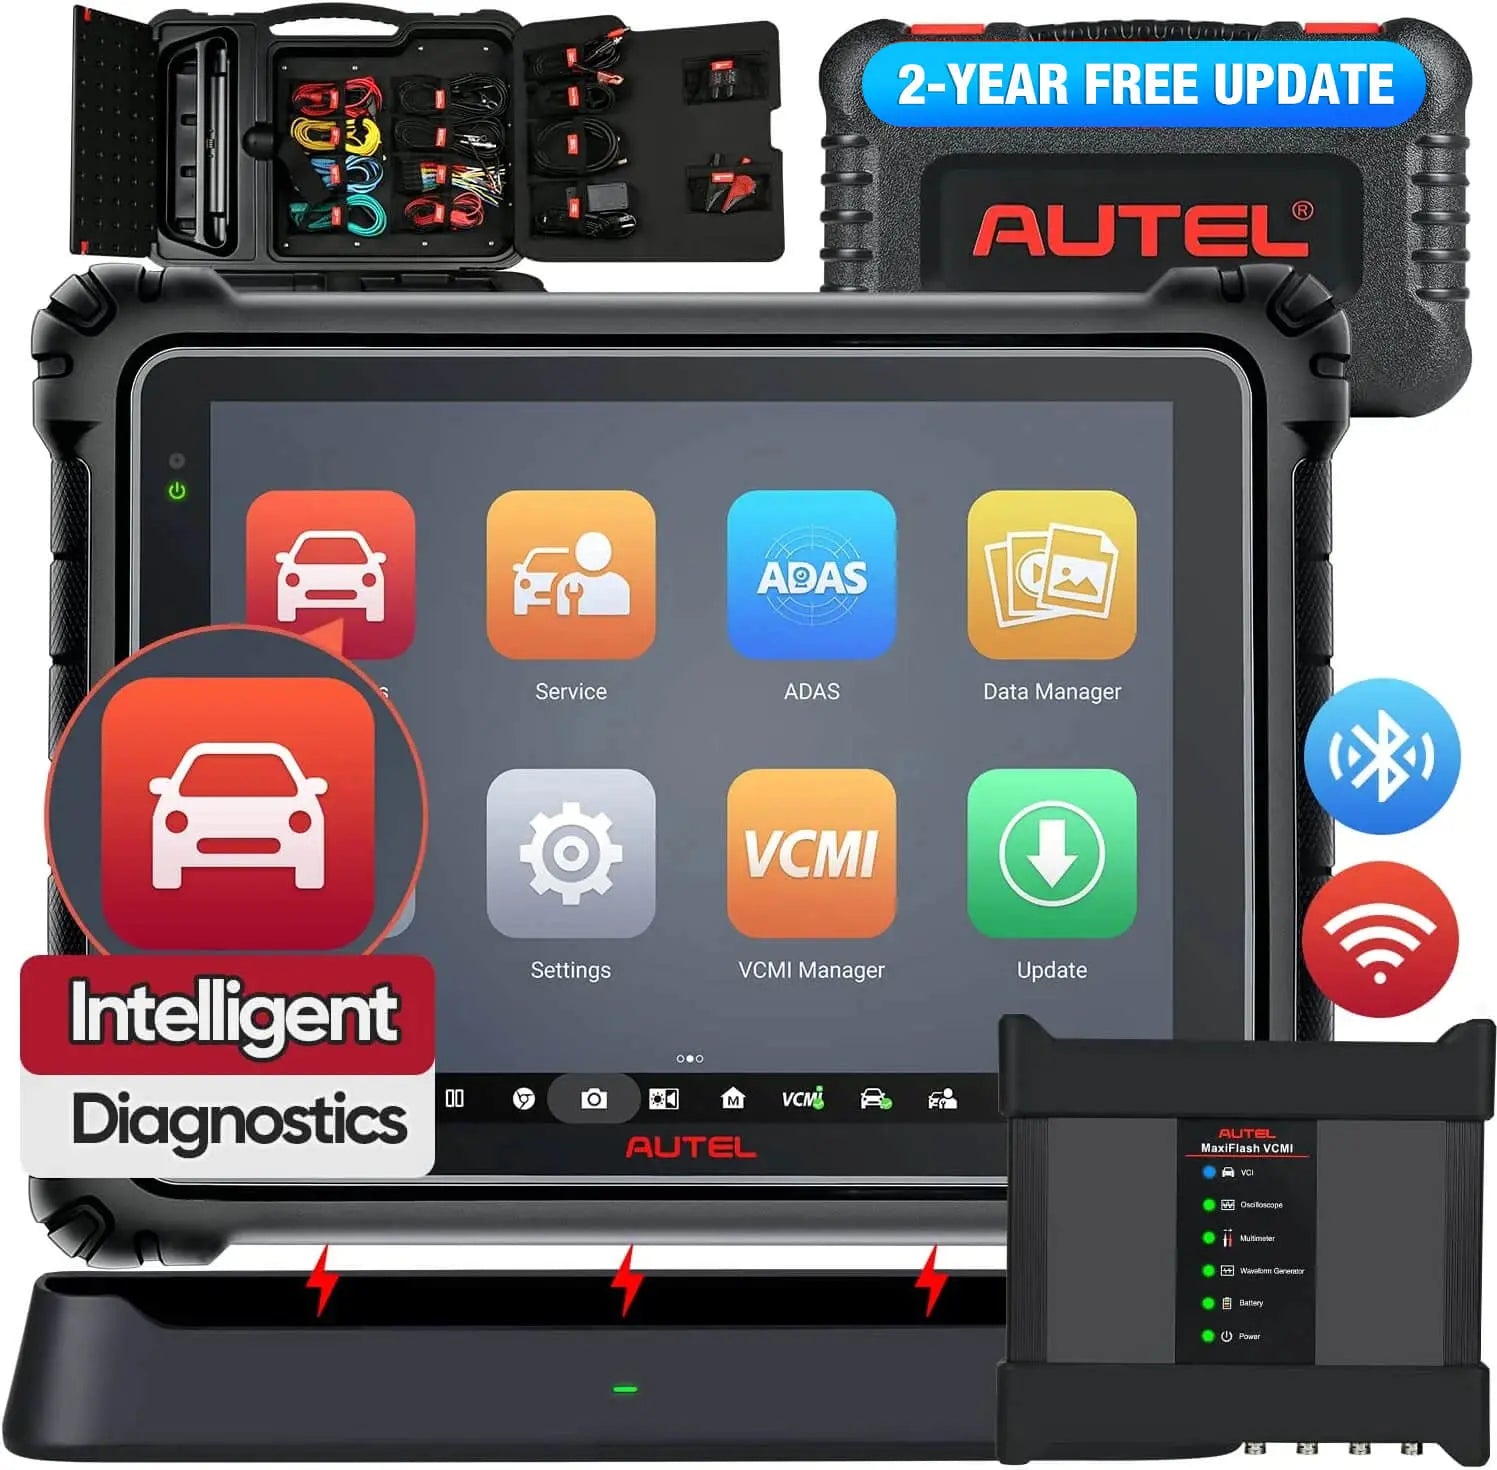 Autel MaxiSys Ultra Scanner 2023 Top Automotive Intelligent Diagnostic Scan Tool with 5-in-1 MaxiFlash VCMI, Bi-Directional Scanner, 40+ Services, Topology Map and Upgraded of MS908S Pro Elite MS906 Pro